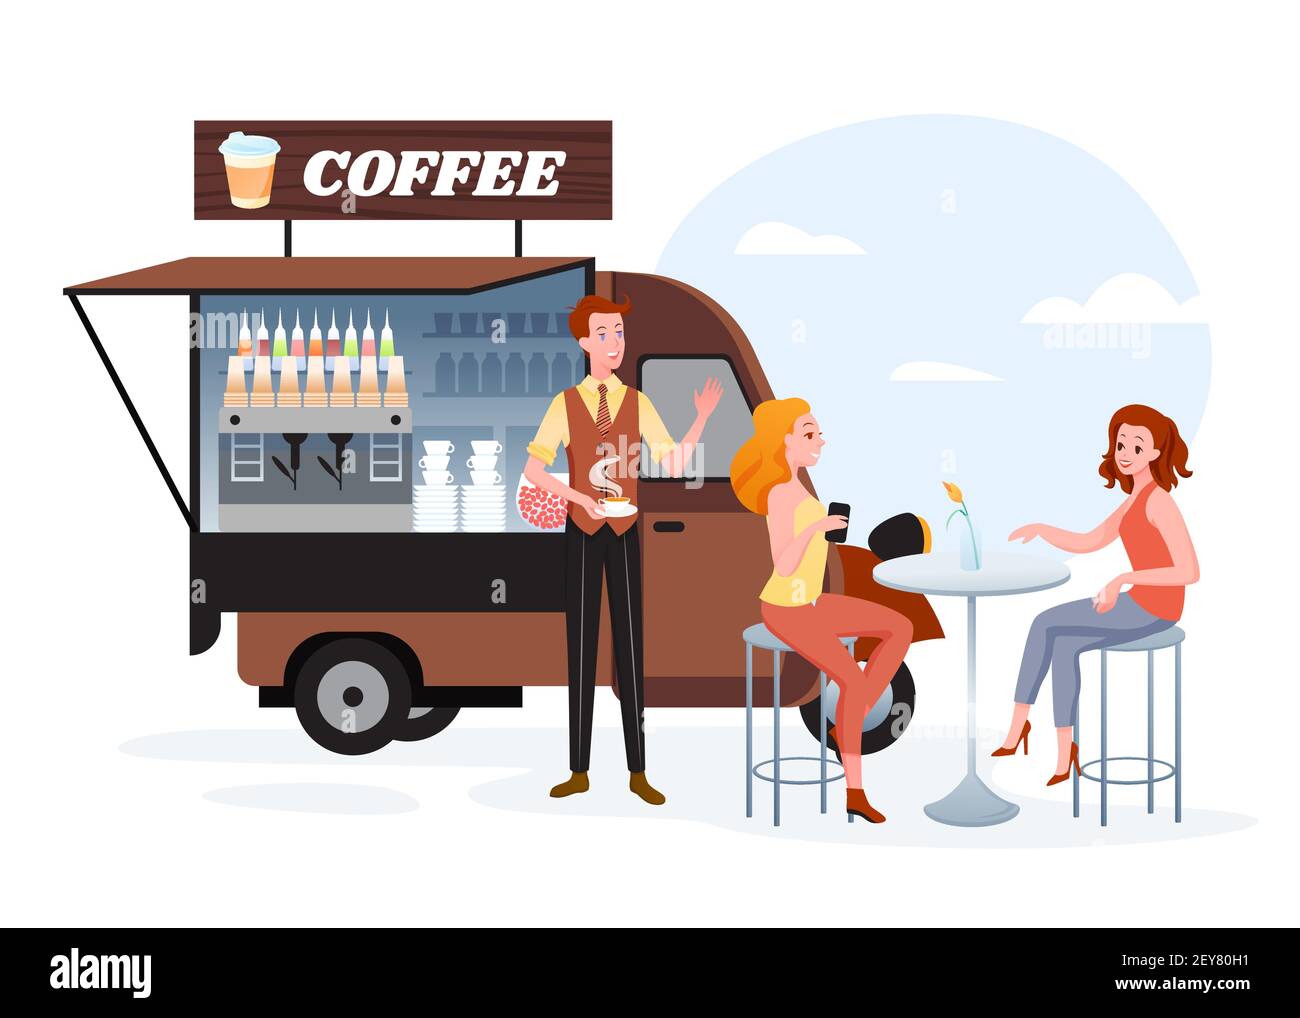 Coffee street market truck van car stall on sidewalk, friends waiting for cup of drink Stock Vector